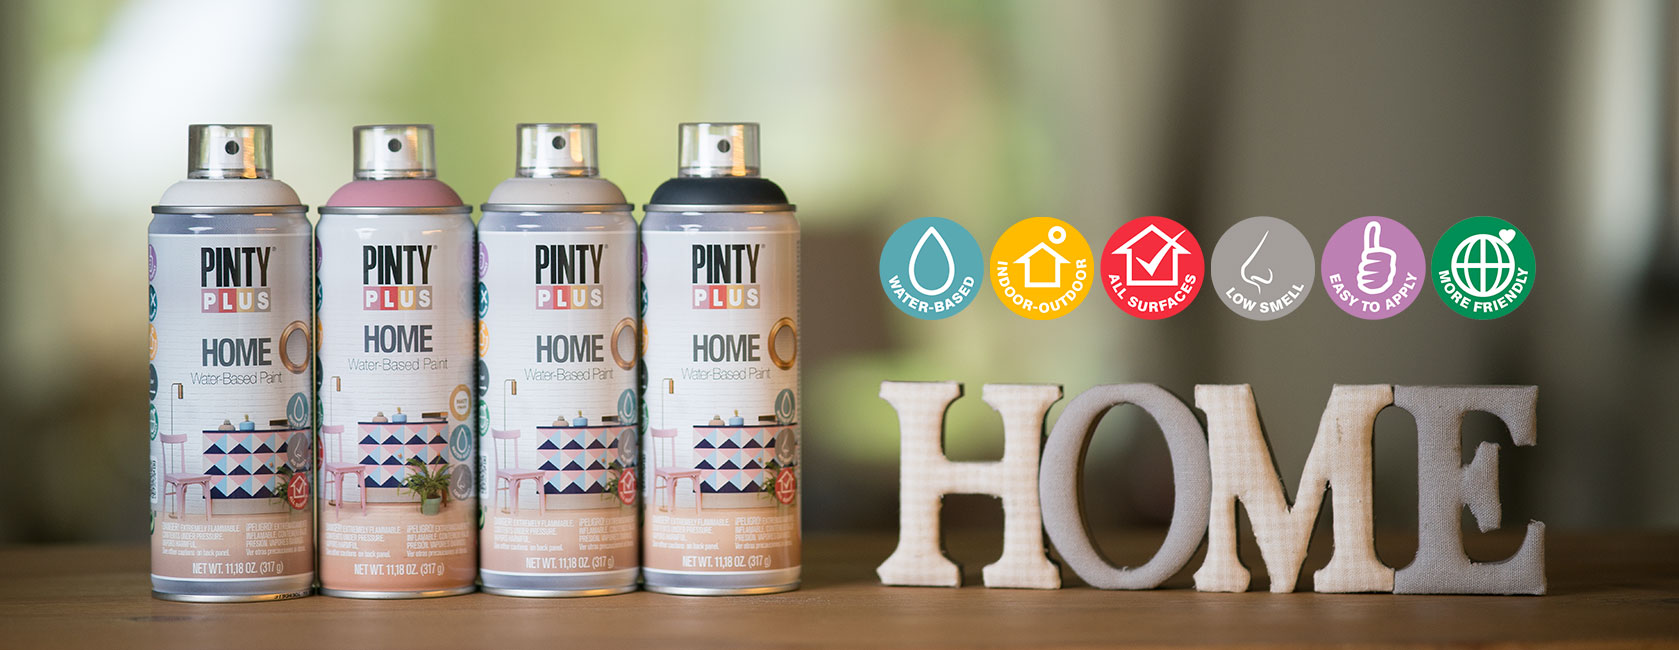 Pintyplus Home spray paint for Home decoration